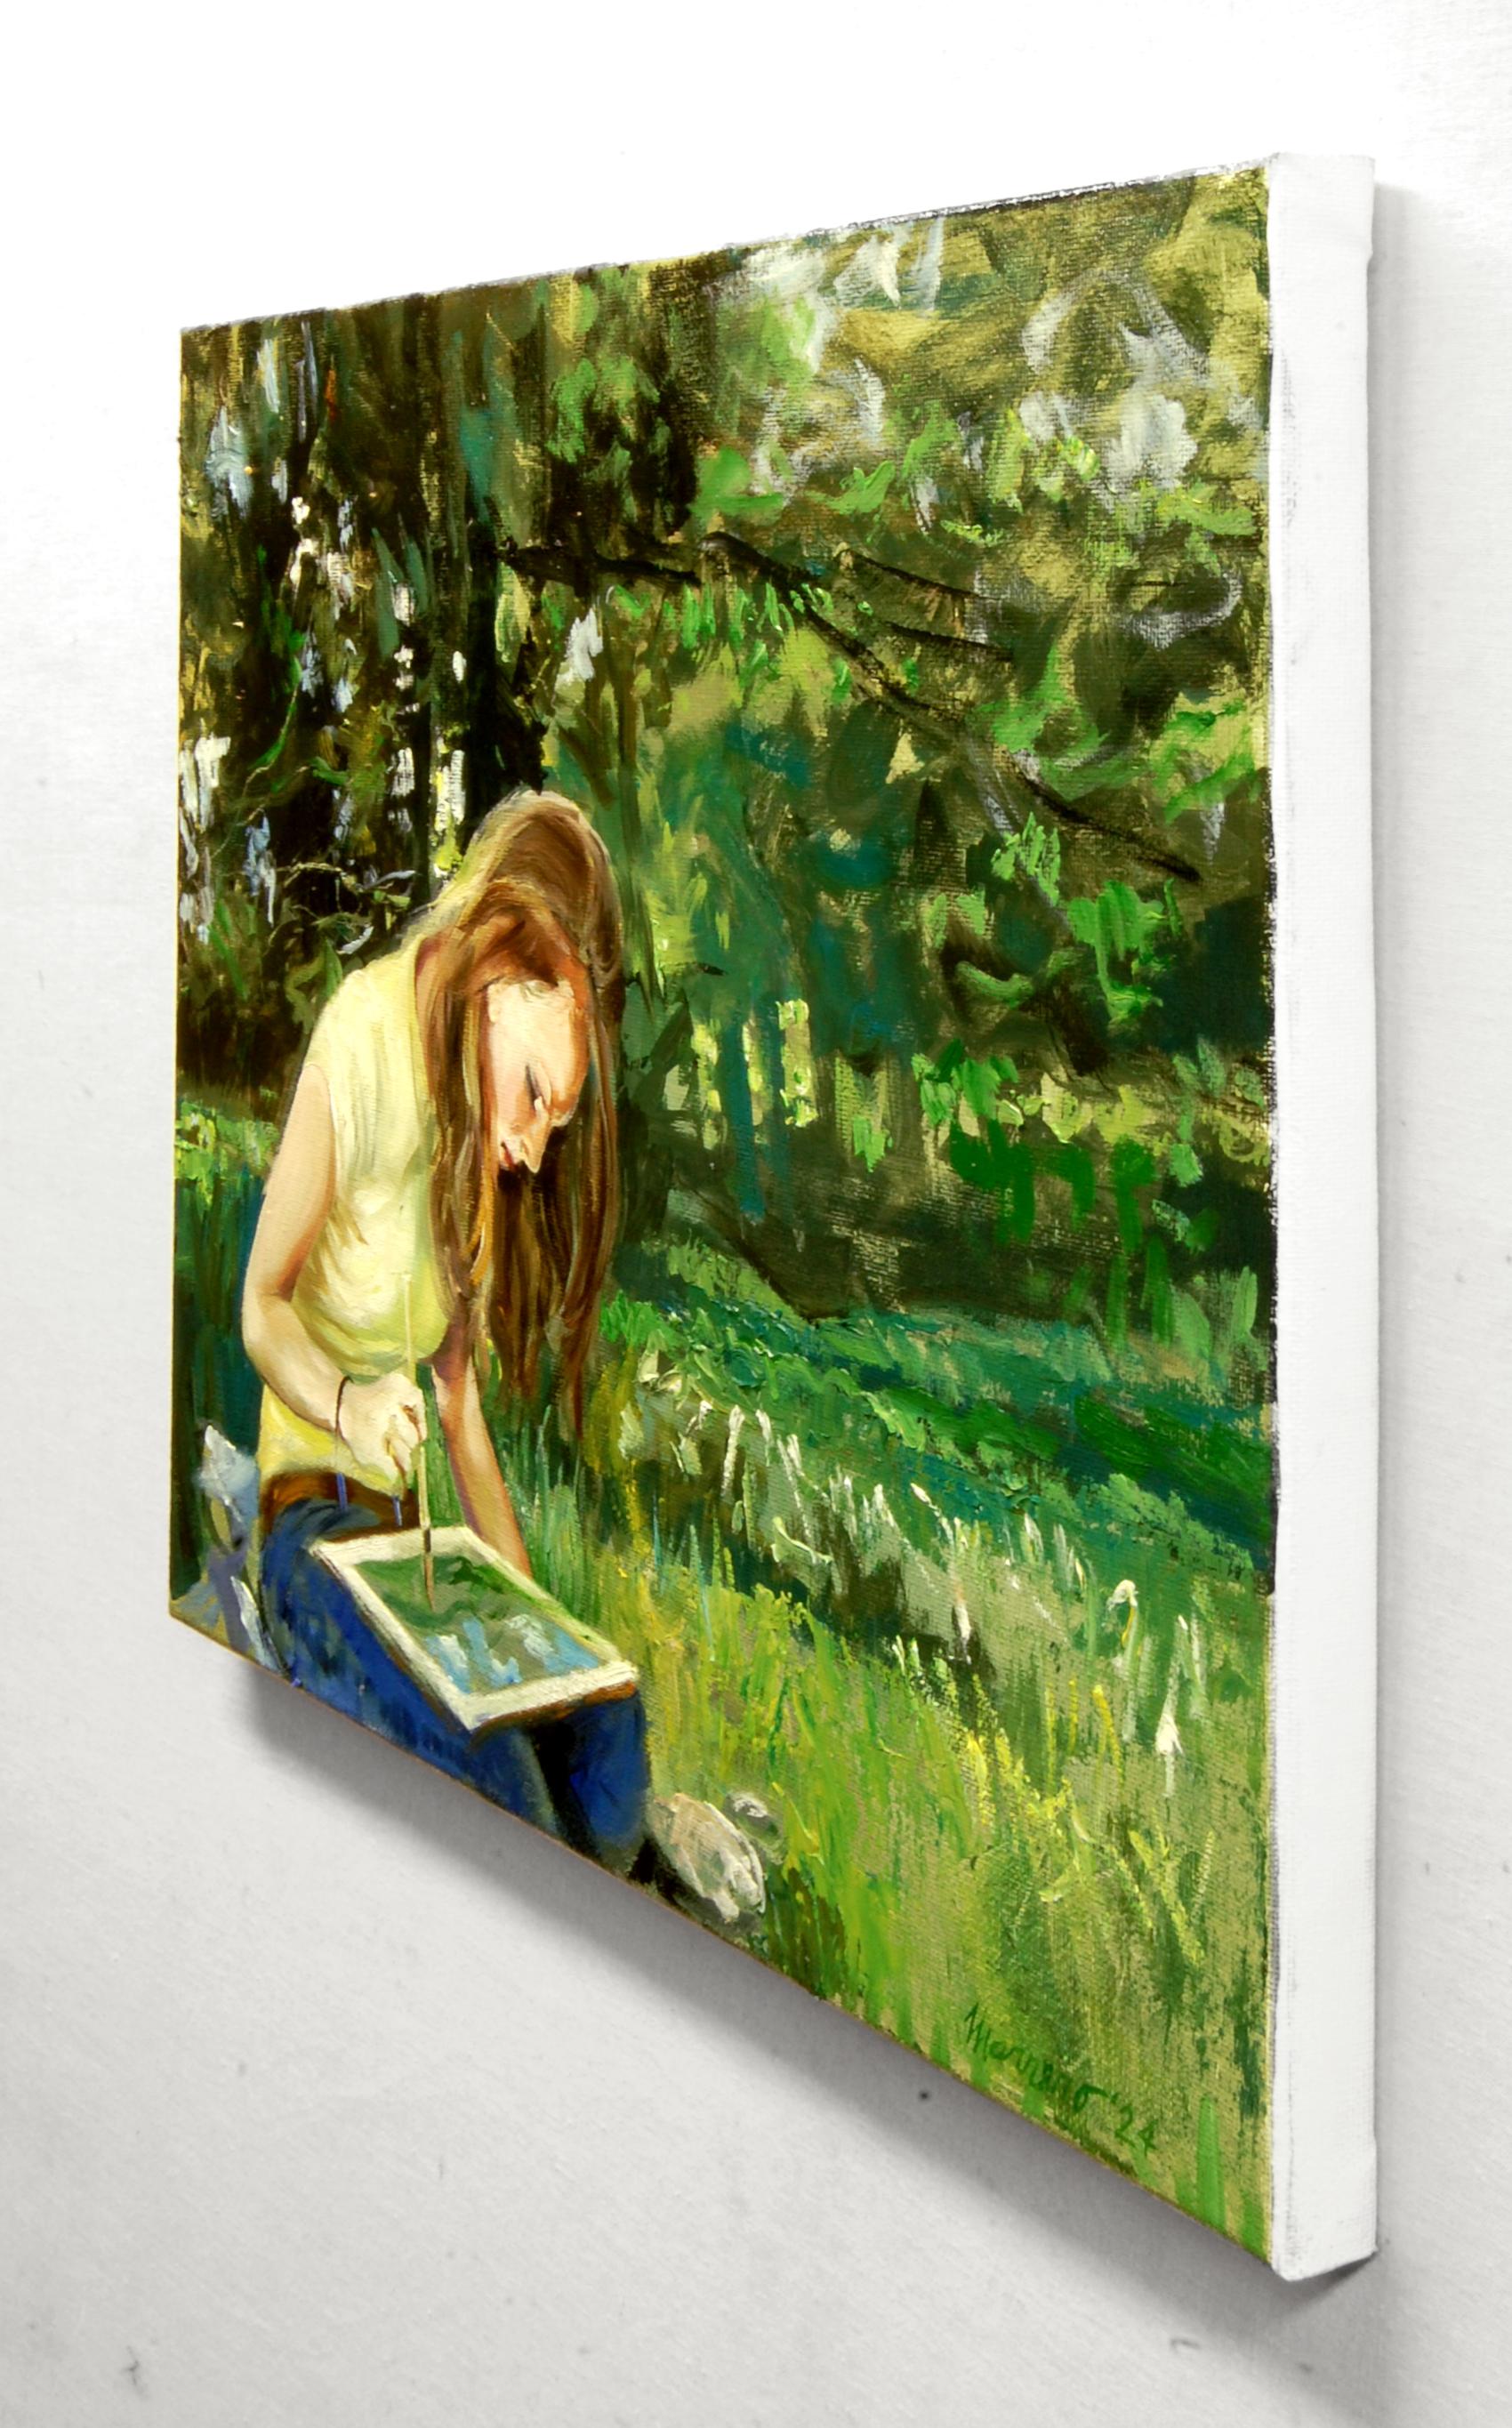 <p>Artist Comments<br>A young woman sits on the grass, deeply engrossed in painting the scenery before her. Loose brushwork and palette knife techniques bring to life the graceful light and textures of the moment. The painting features a former